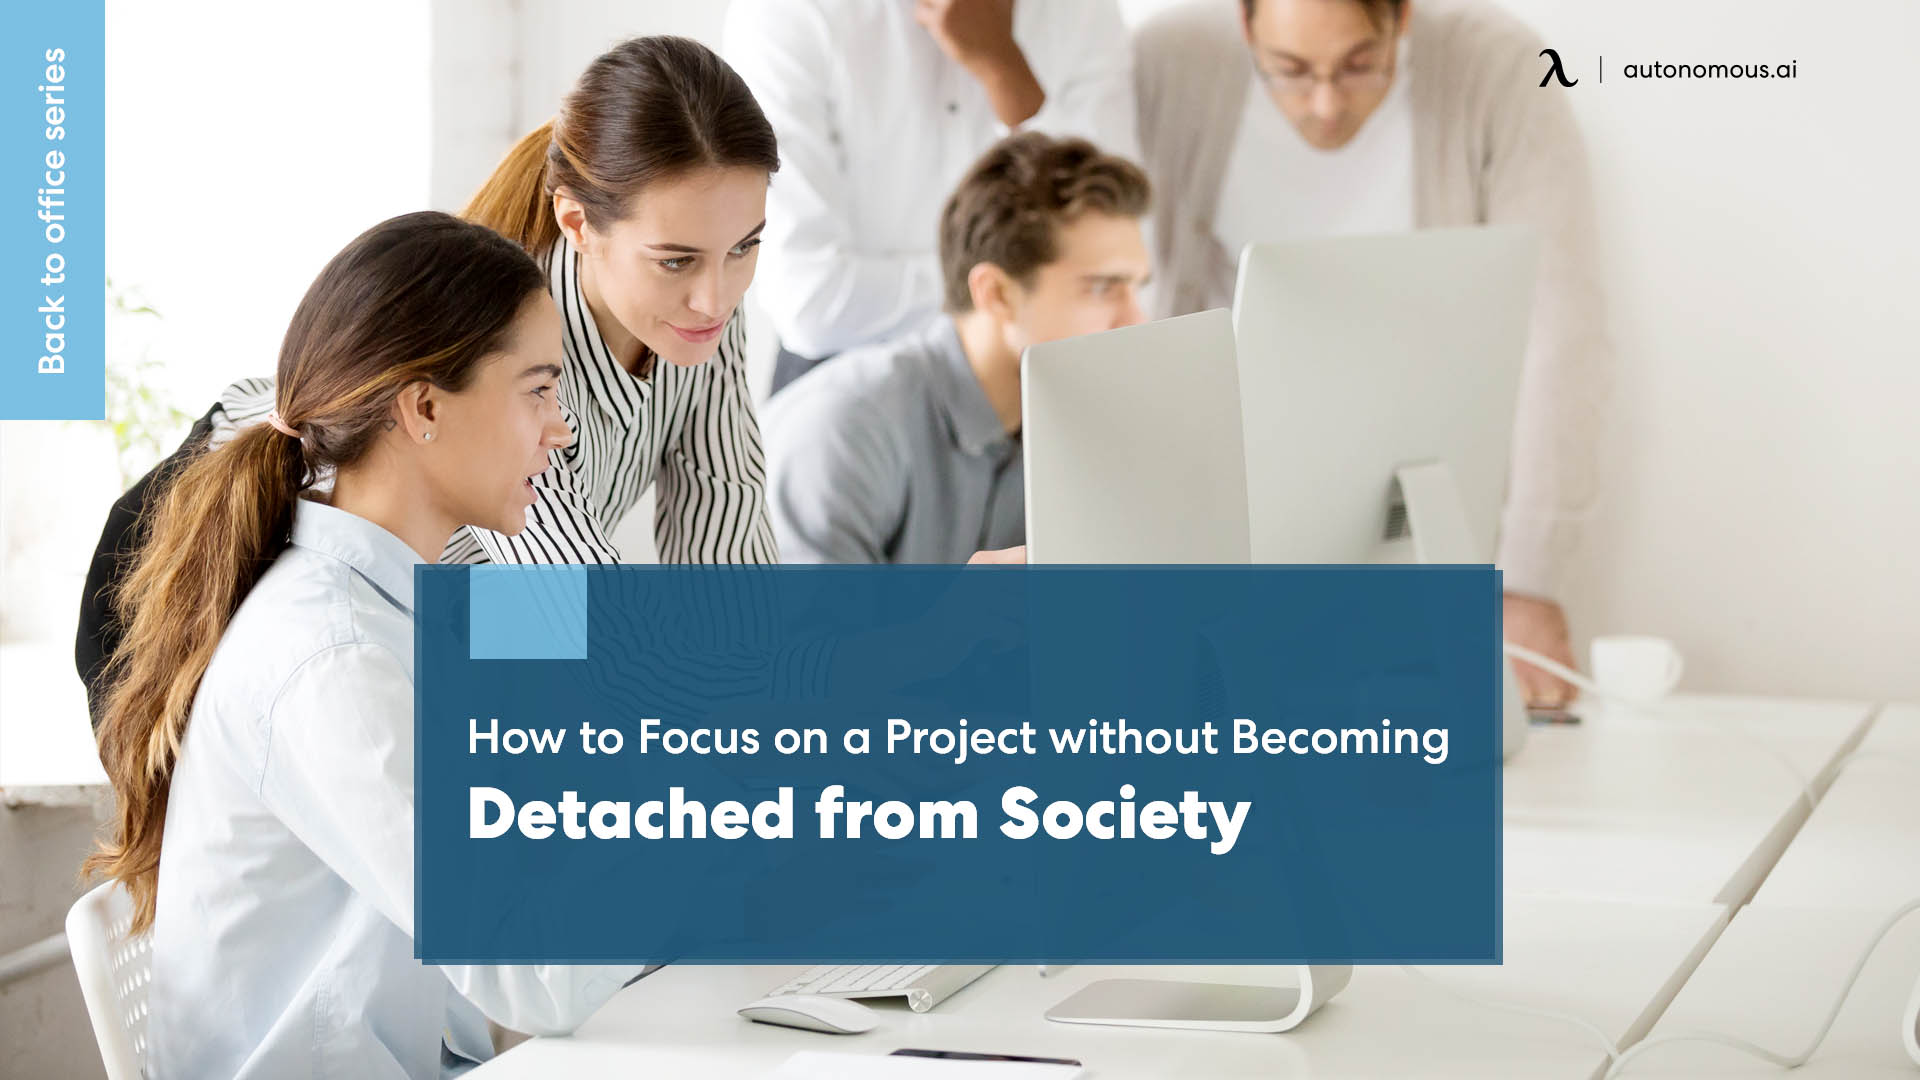 How to Focus on a Project without Becoming Detached from Society?